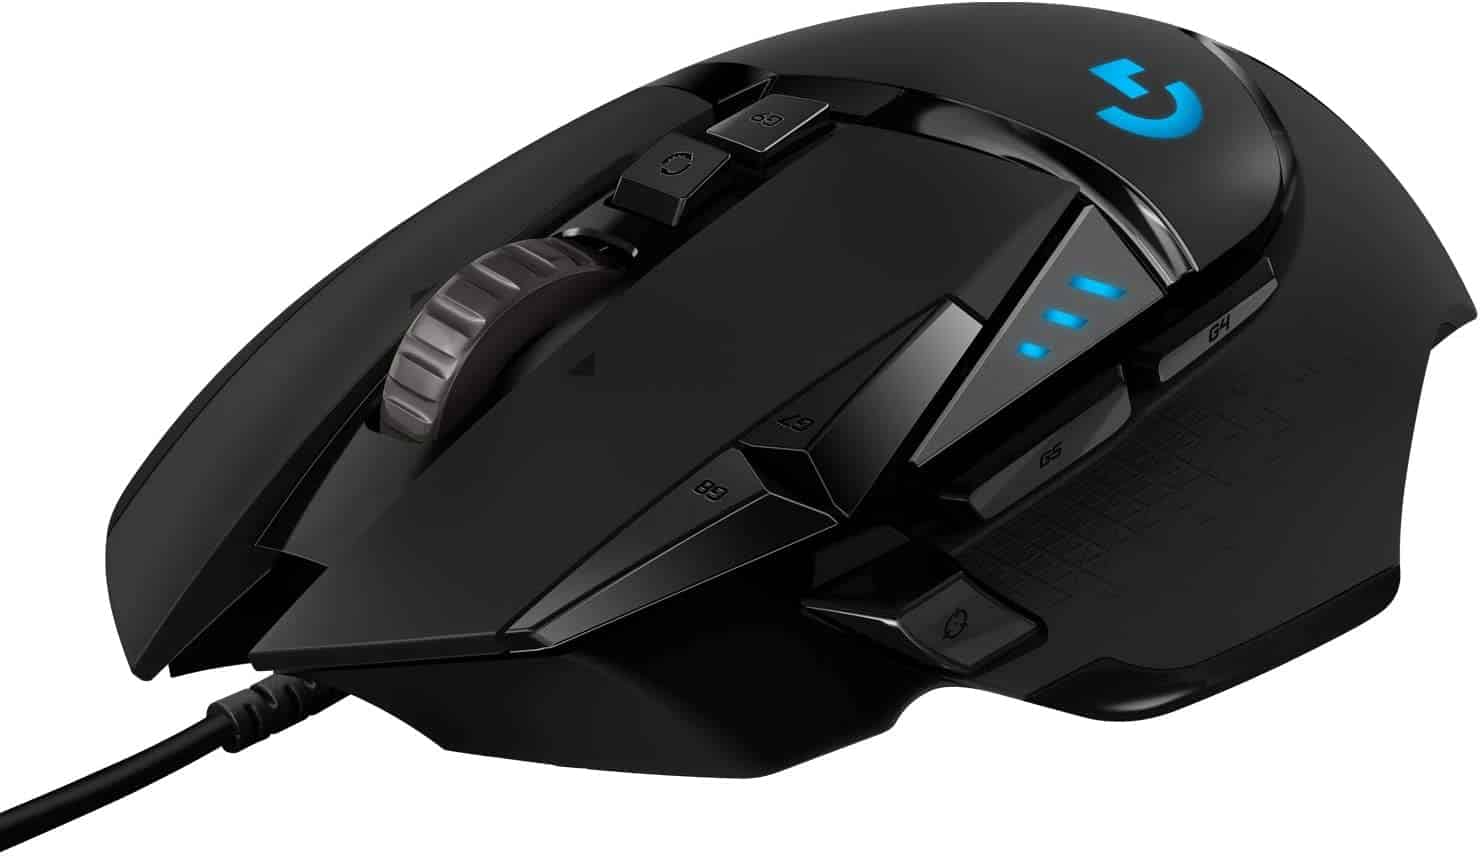 Deal Alert: Logitech G502 HERO Wired Gaming Mouse down to its lowest price ever!